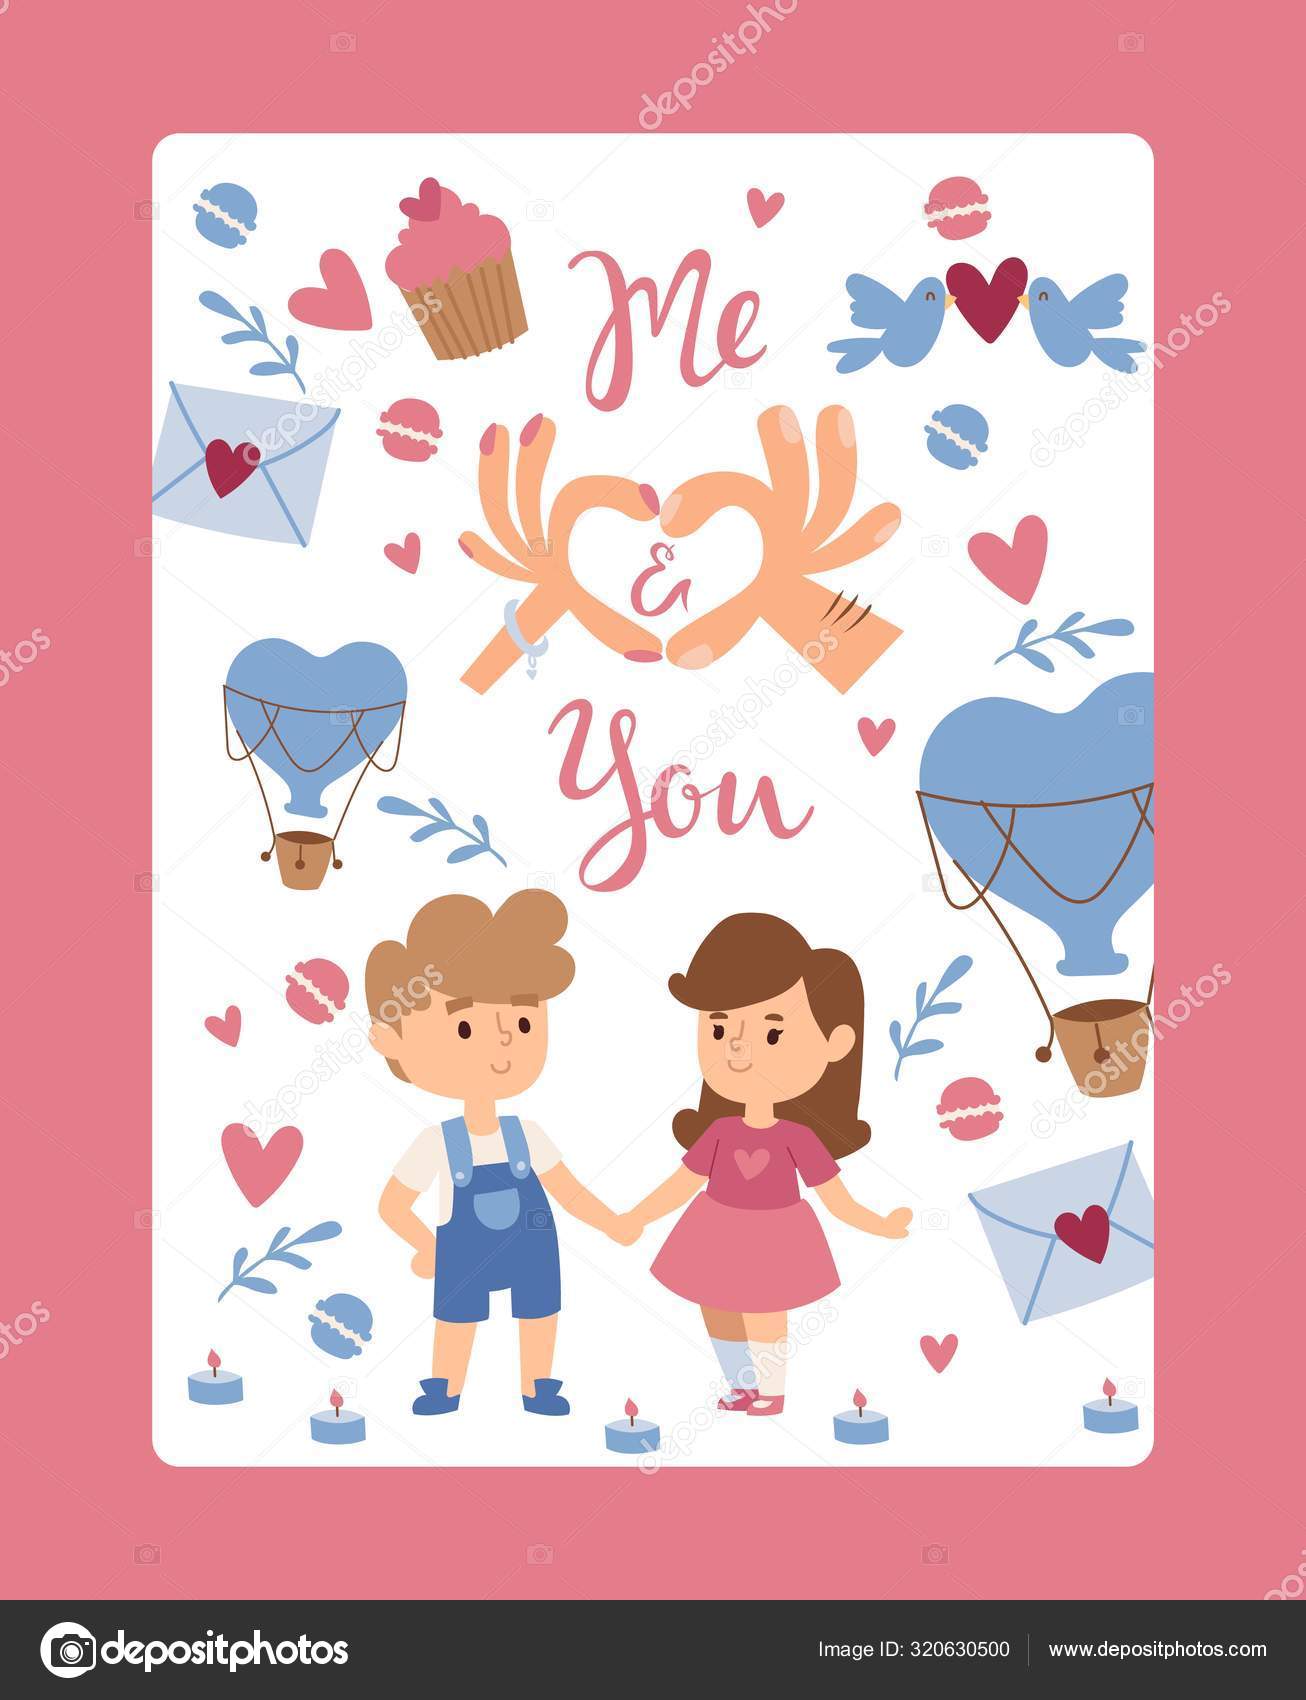 Romantic Valentine Card Vector Illustration Isolated Icons Of Love Cute Children Holding Hands Boy And Girl Cartoon Characters Romantic Couple And Symbols Of Love Vector Image By C Adekvat Vector Stock